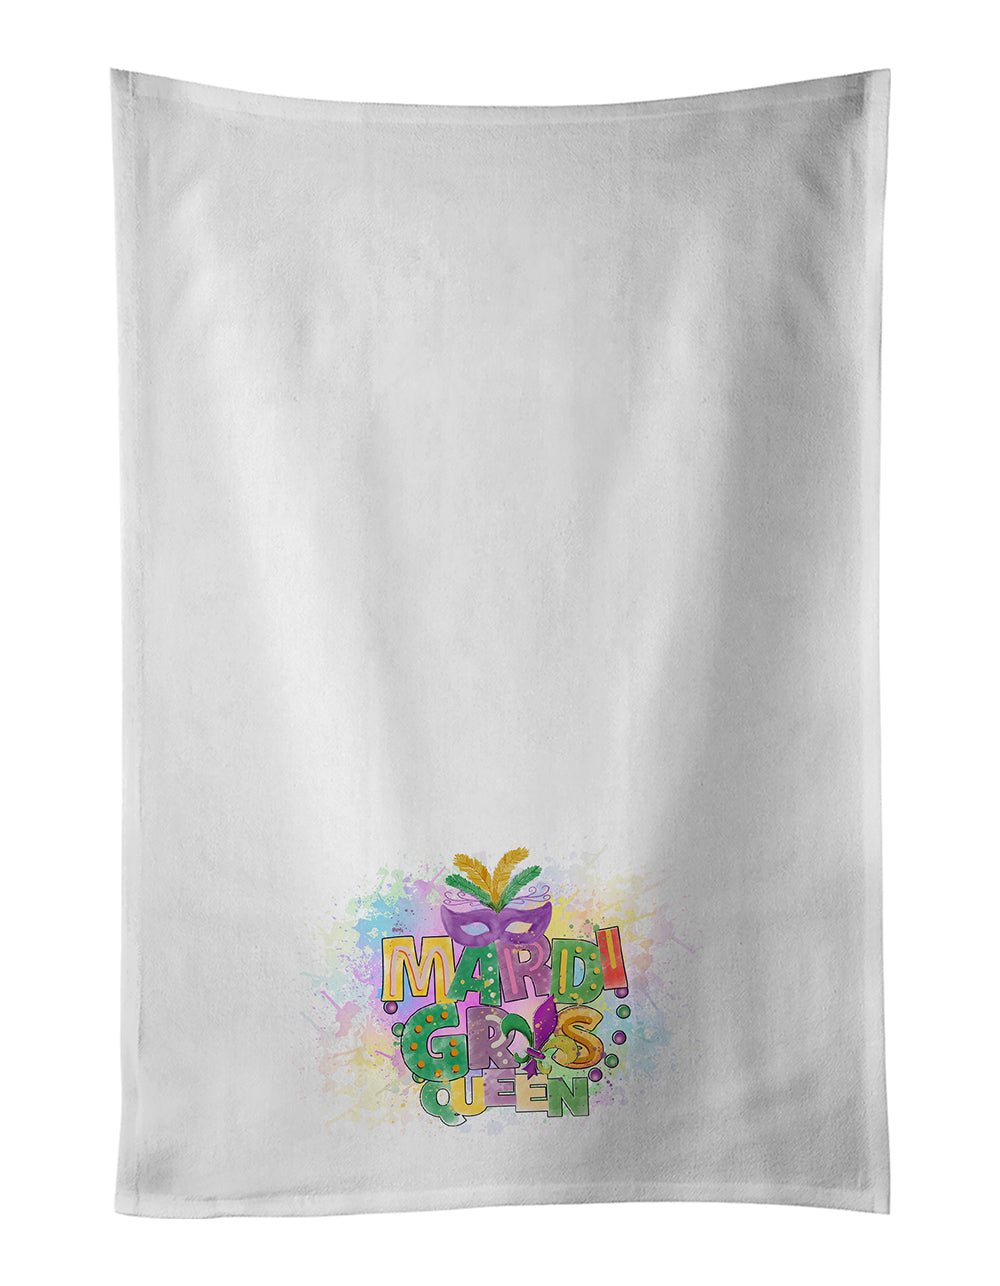 Buy this Mardi Gras Queen White Kitchen Towel Set of 2 Dish Towels